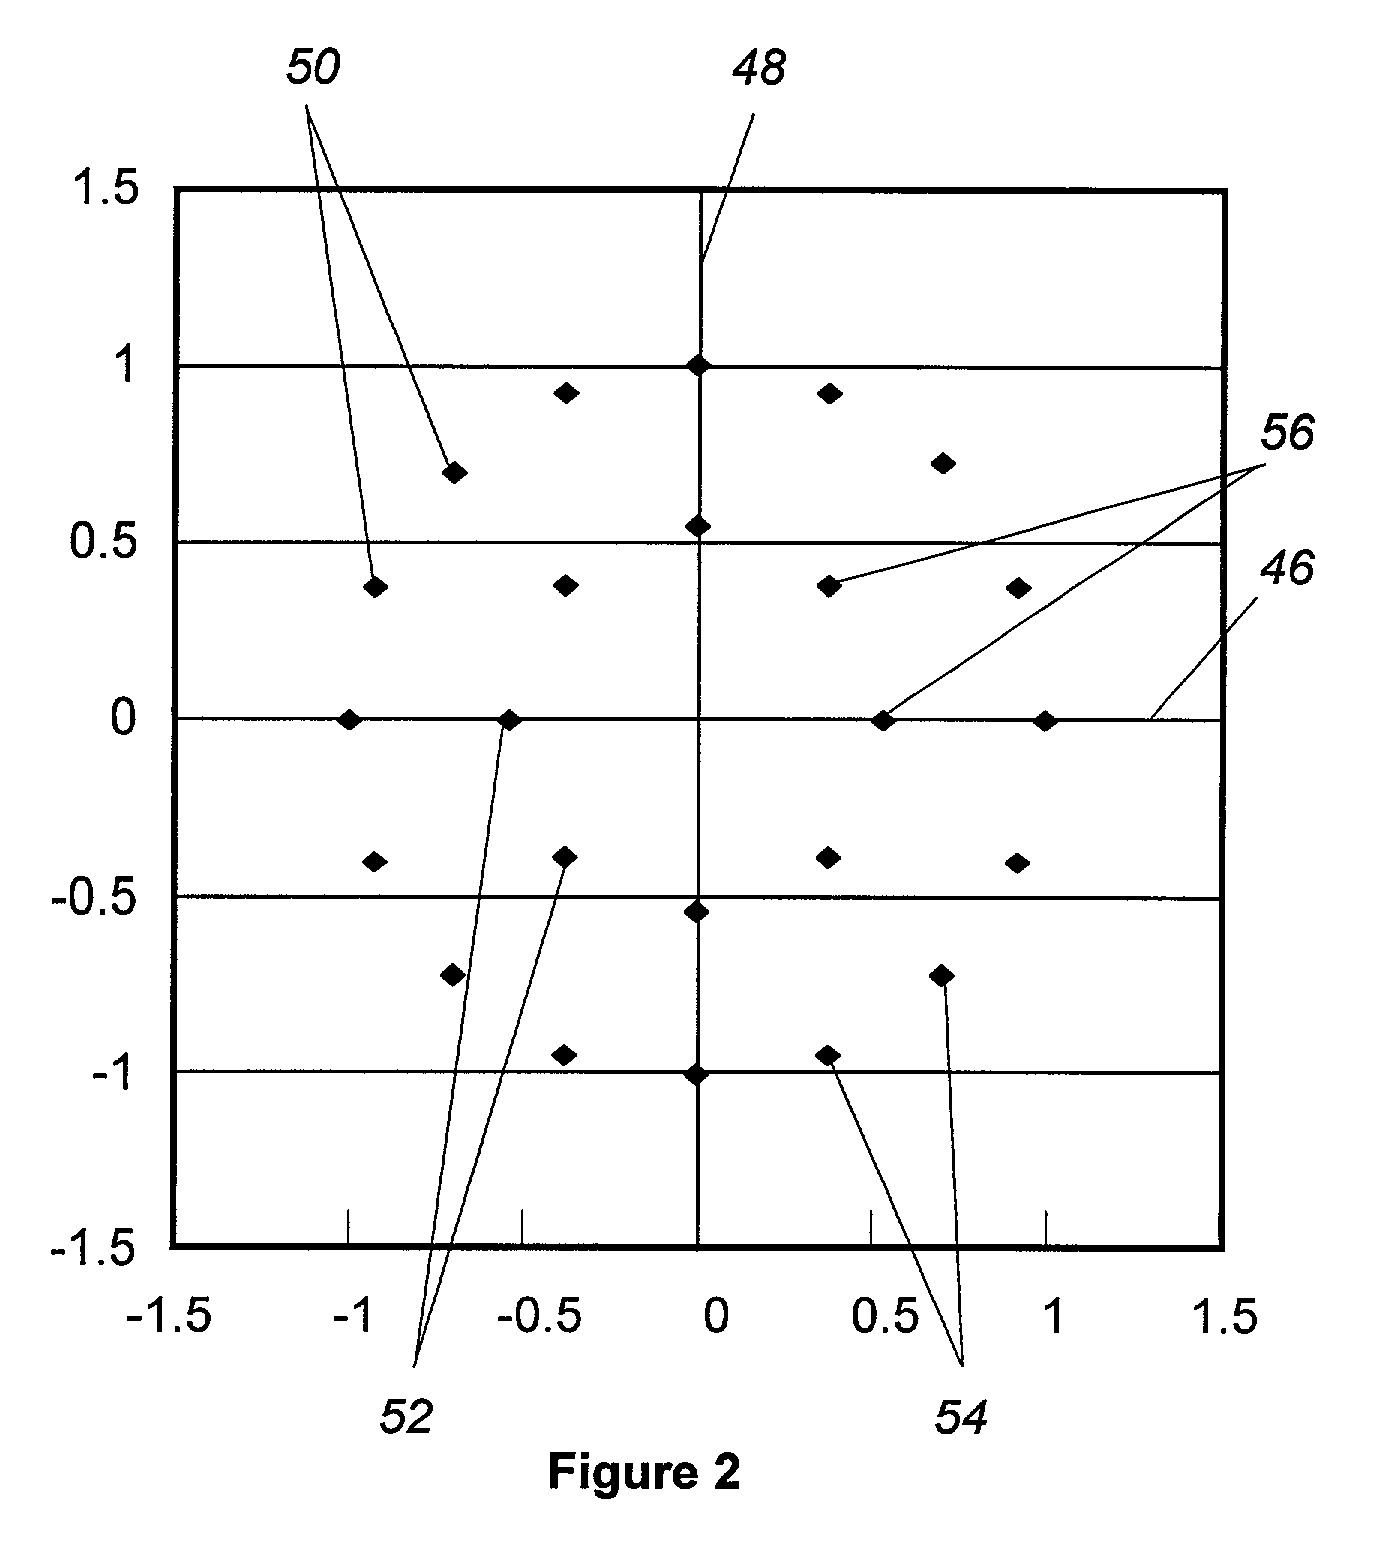 M-ary signal constellations suitable for non-linear amplification